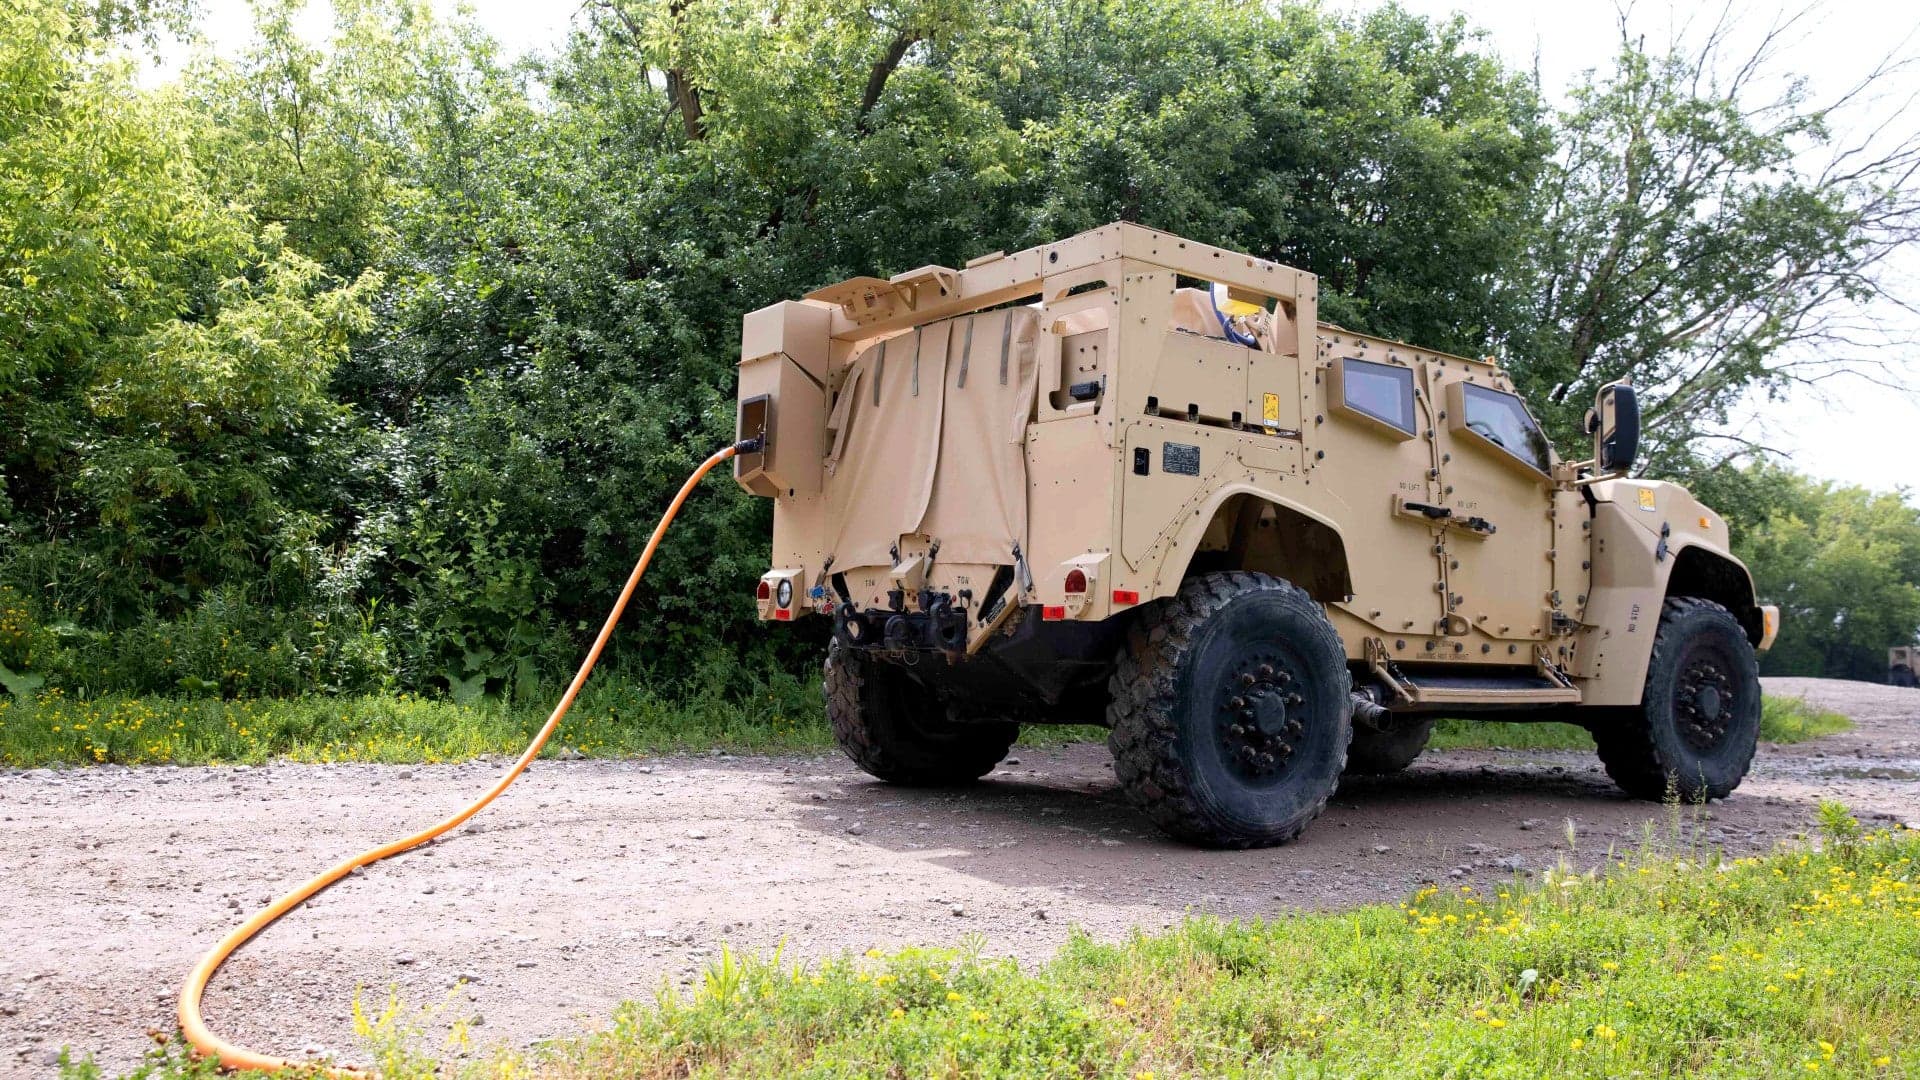 Oshkosh Reveals New Hybrid-Electric Variant Of The Military’s Light Tactical Vehicle